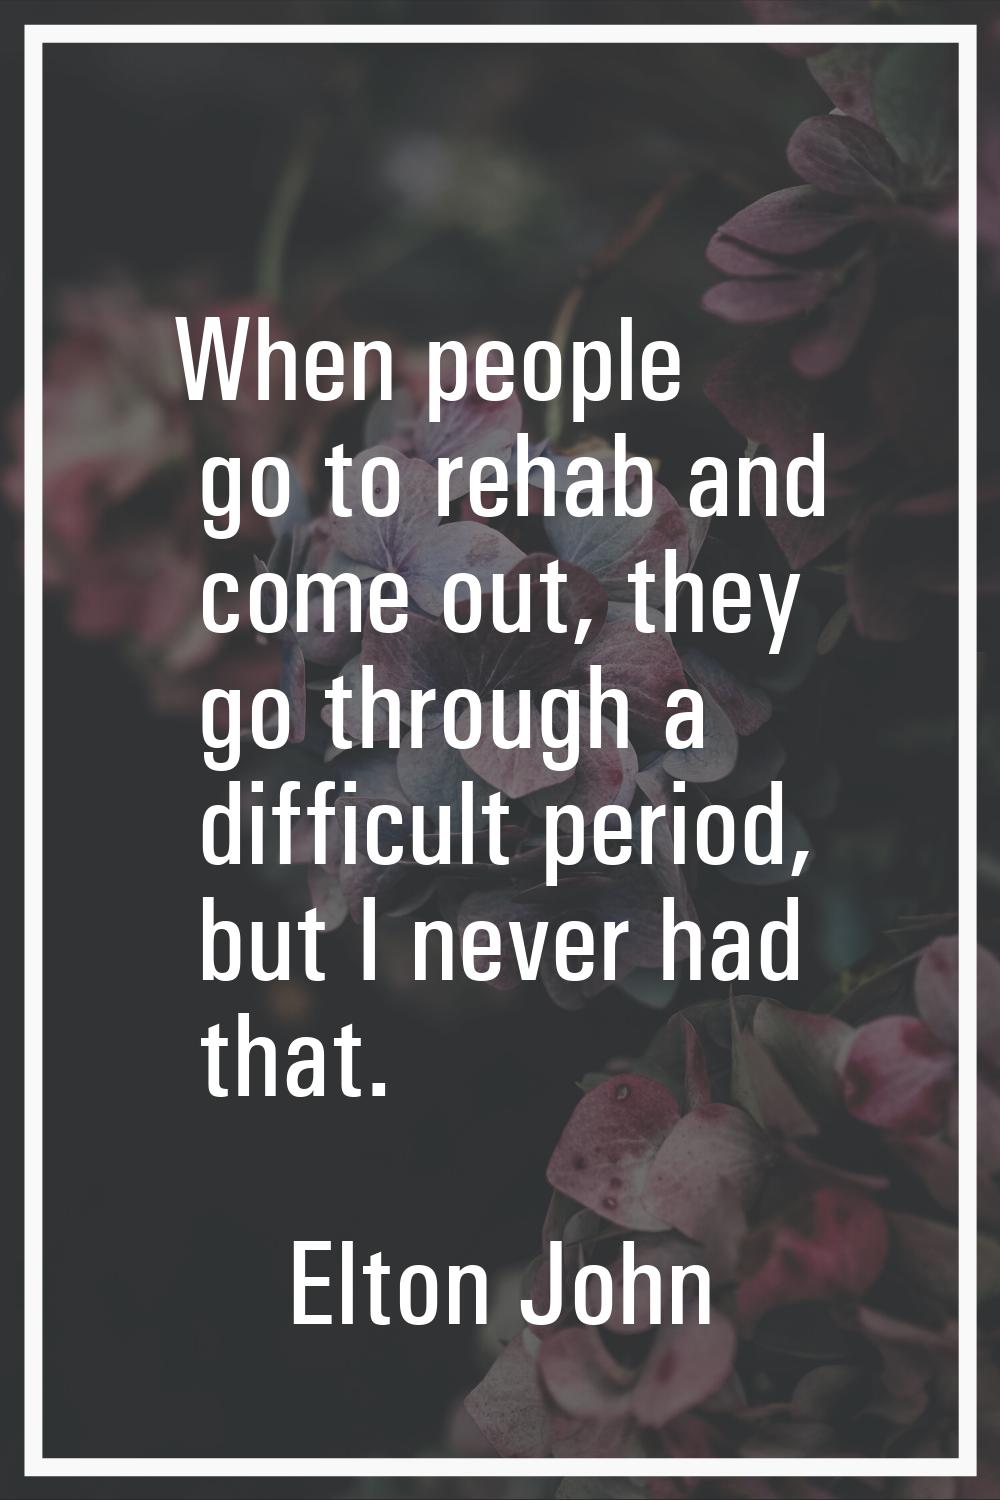 When people go to rehab and come out, they go through a difficult period, but I never had that.